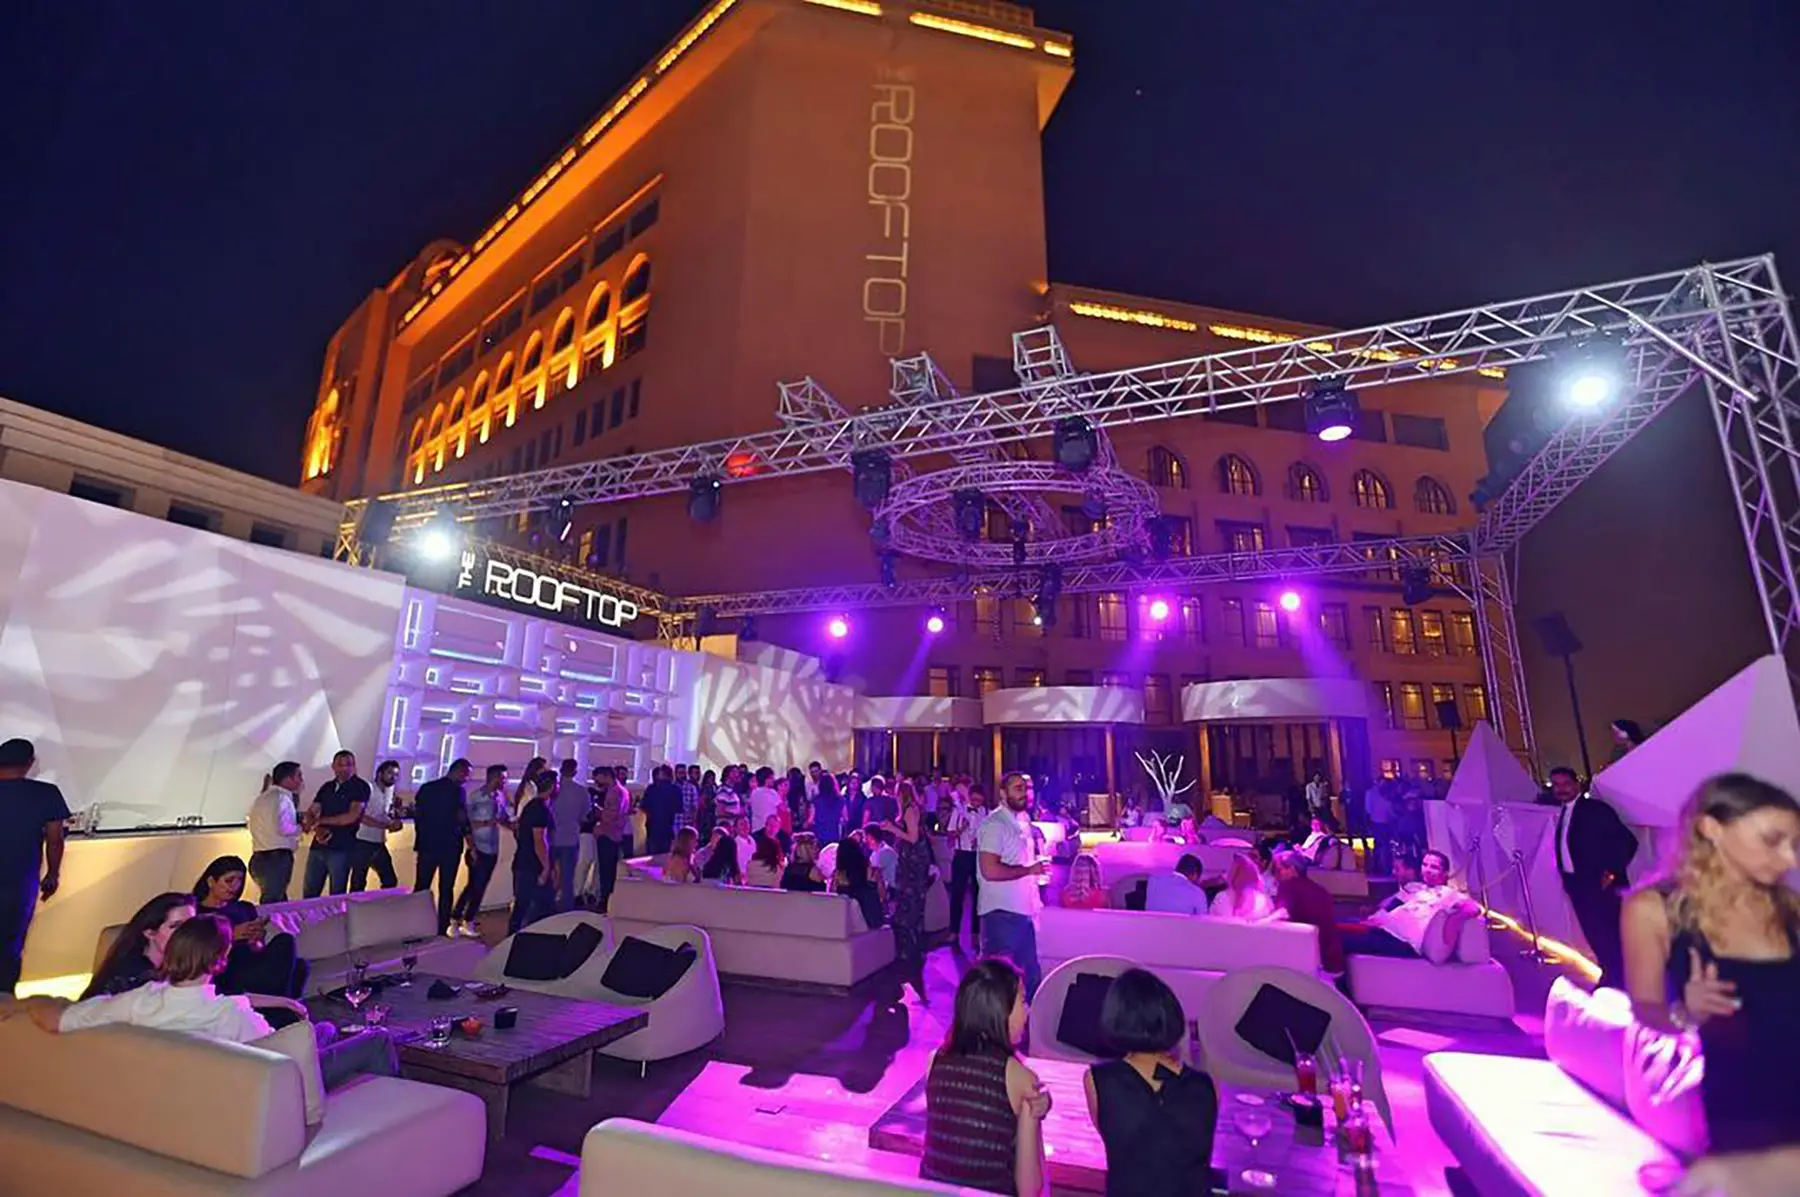 The Rooftop, Doha